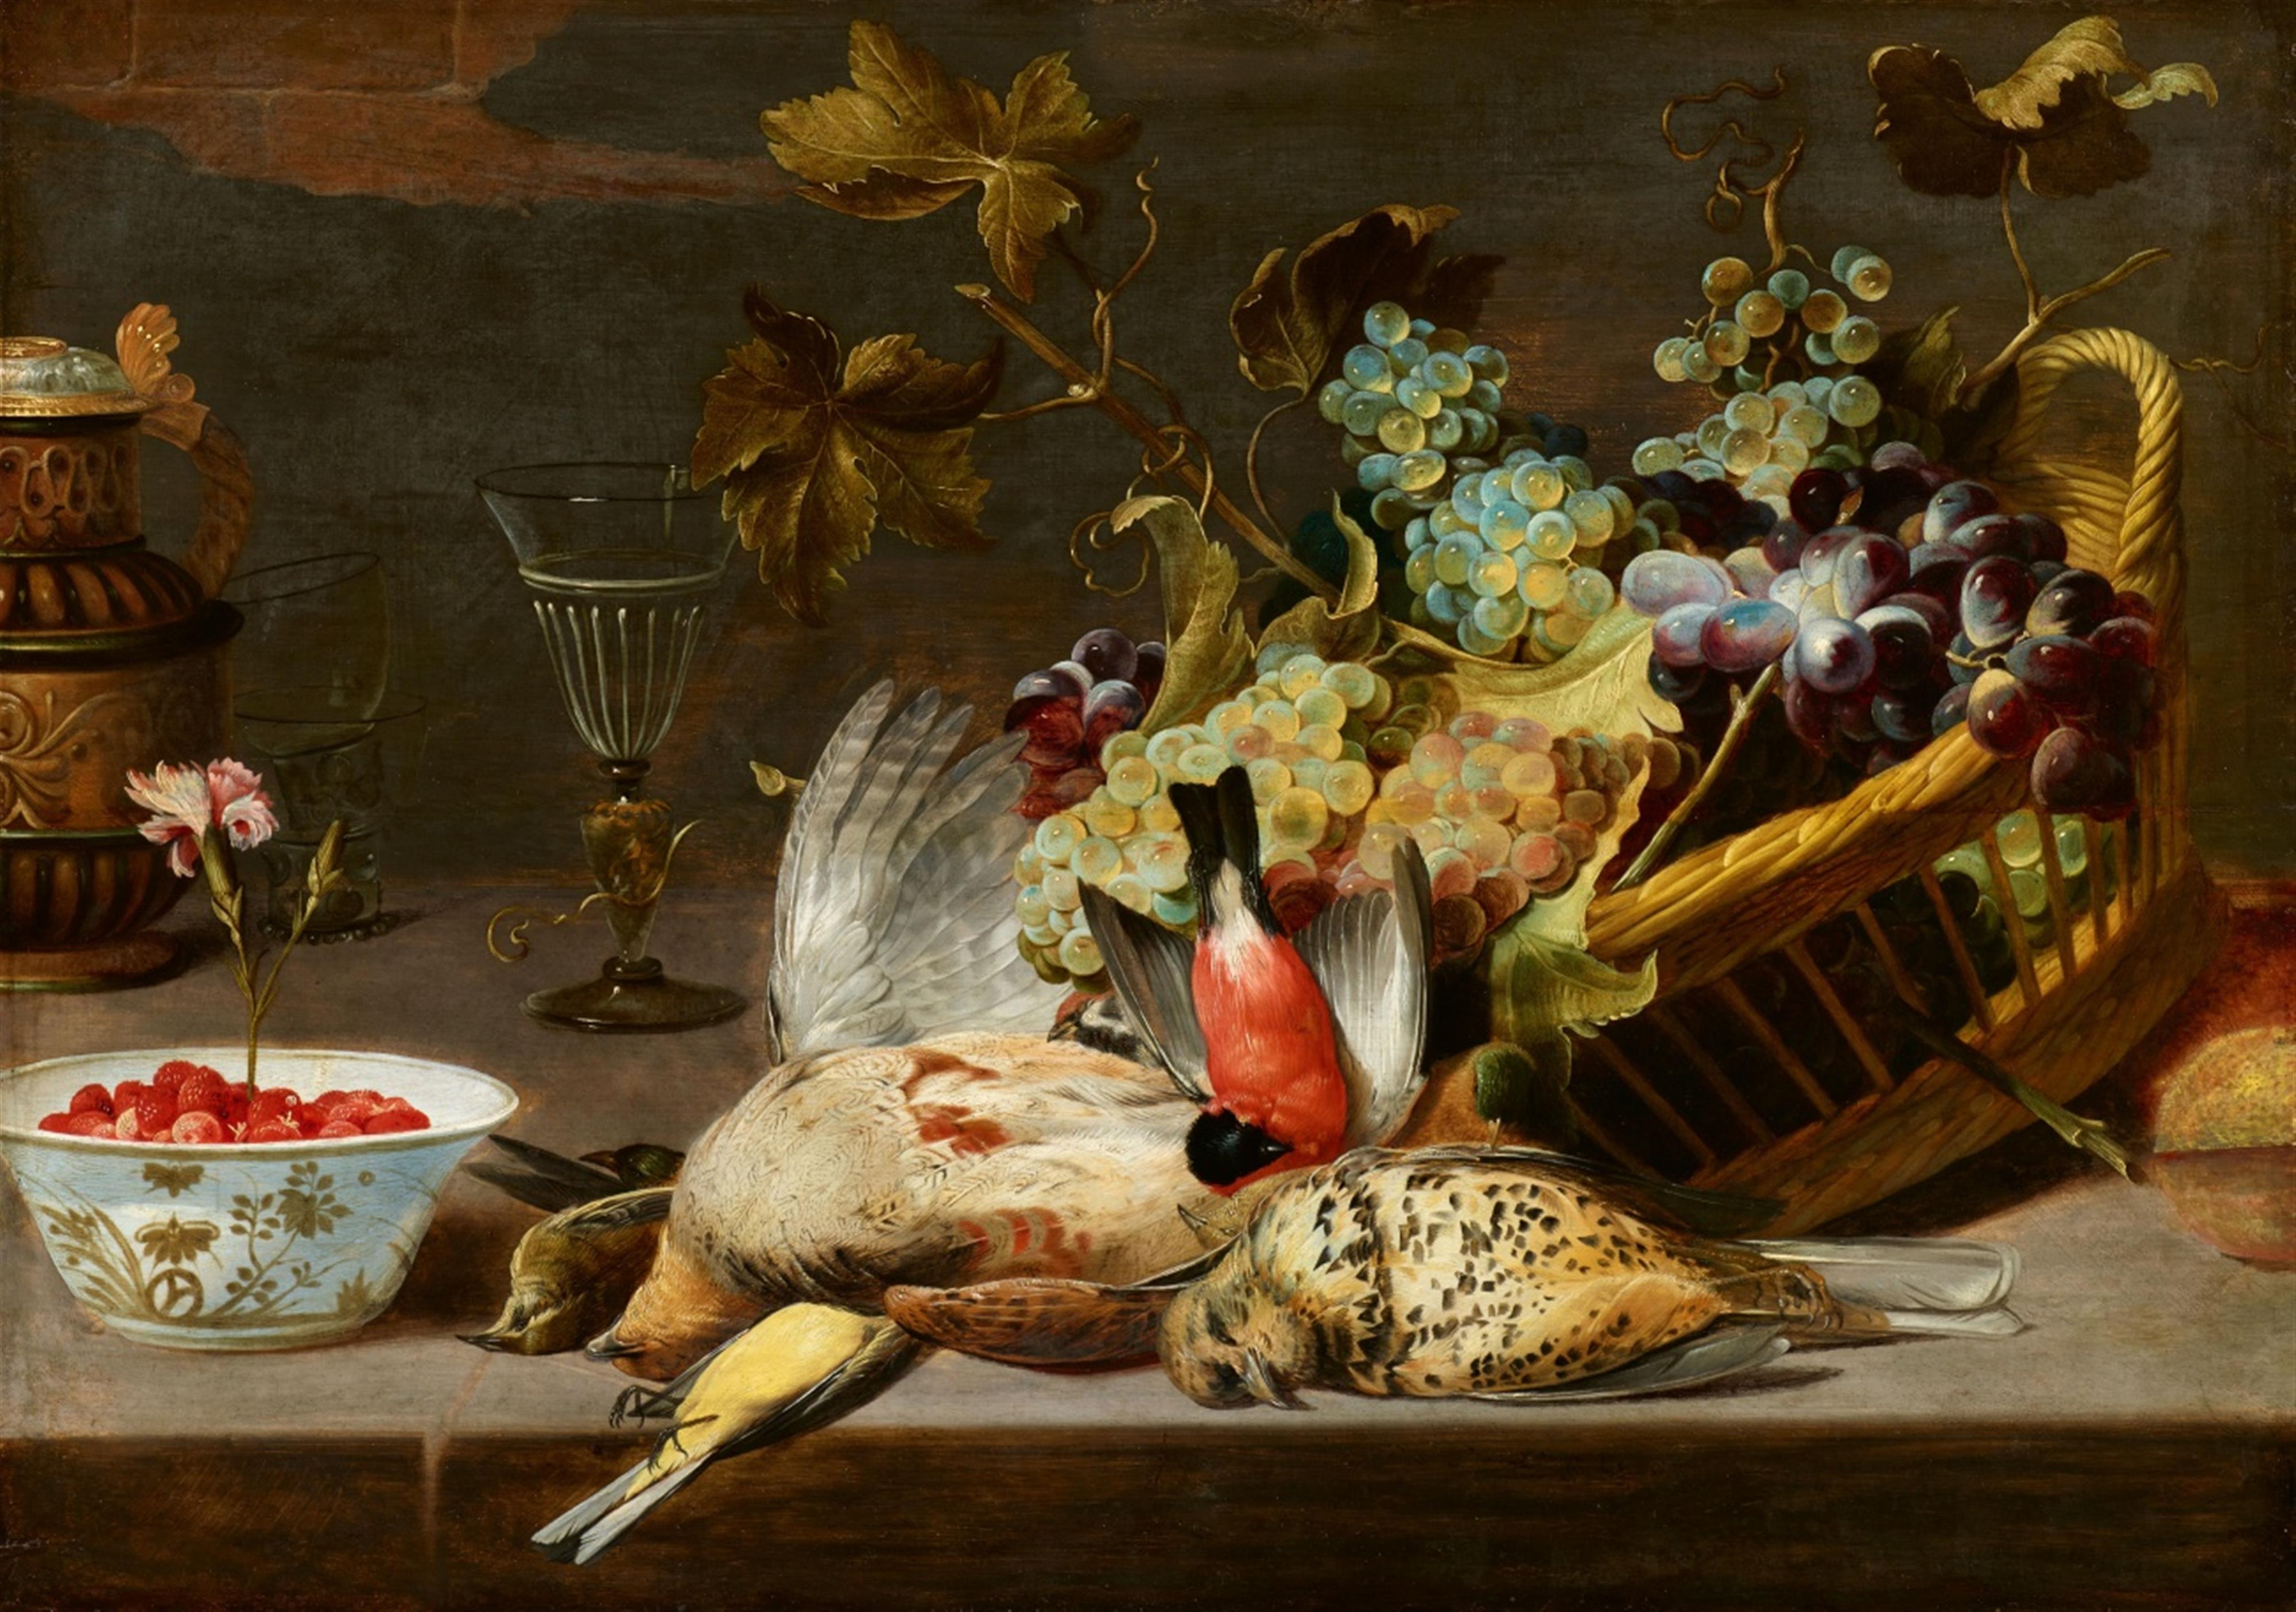 Frans Snyders - Still Life with Birds and a Basket of Grapes - image-1